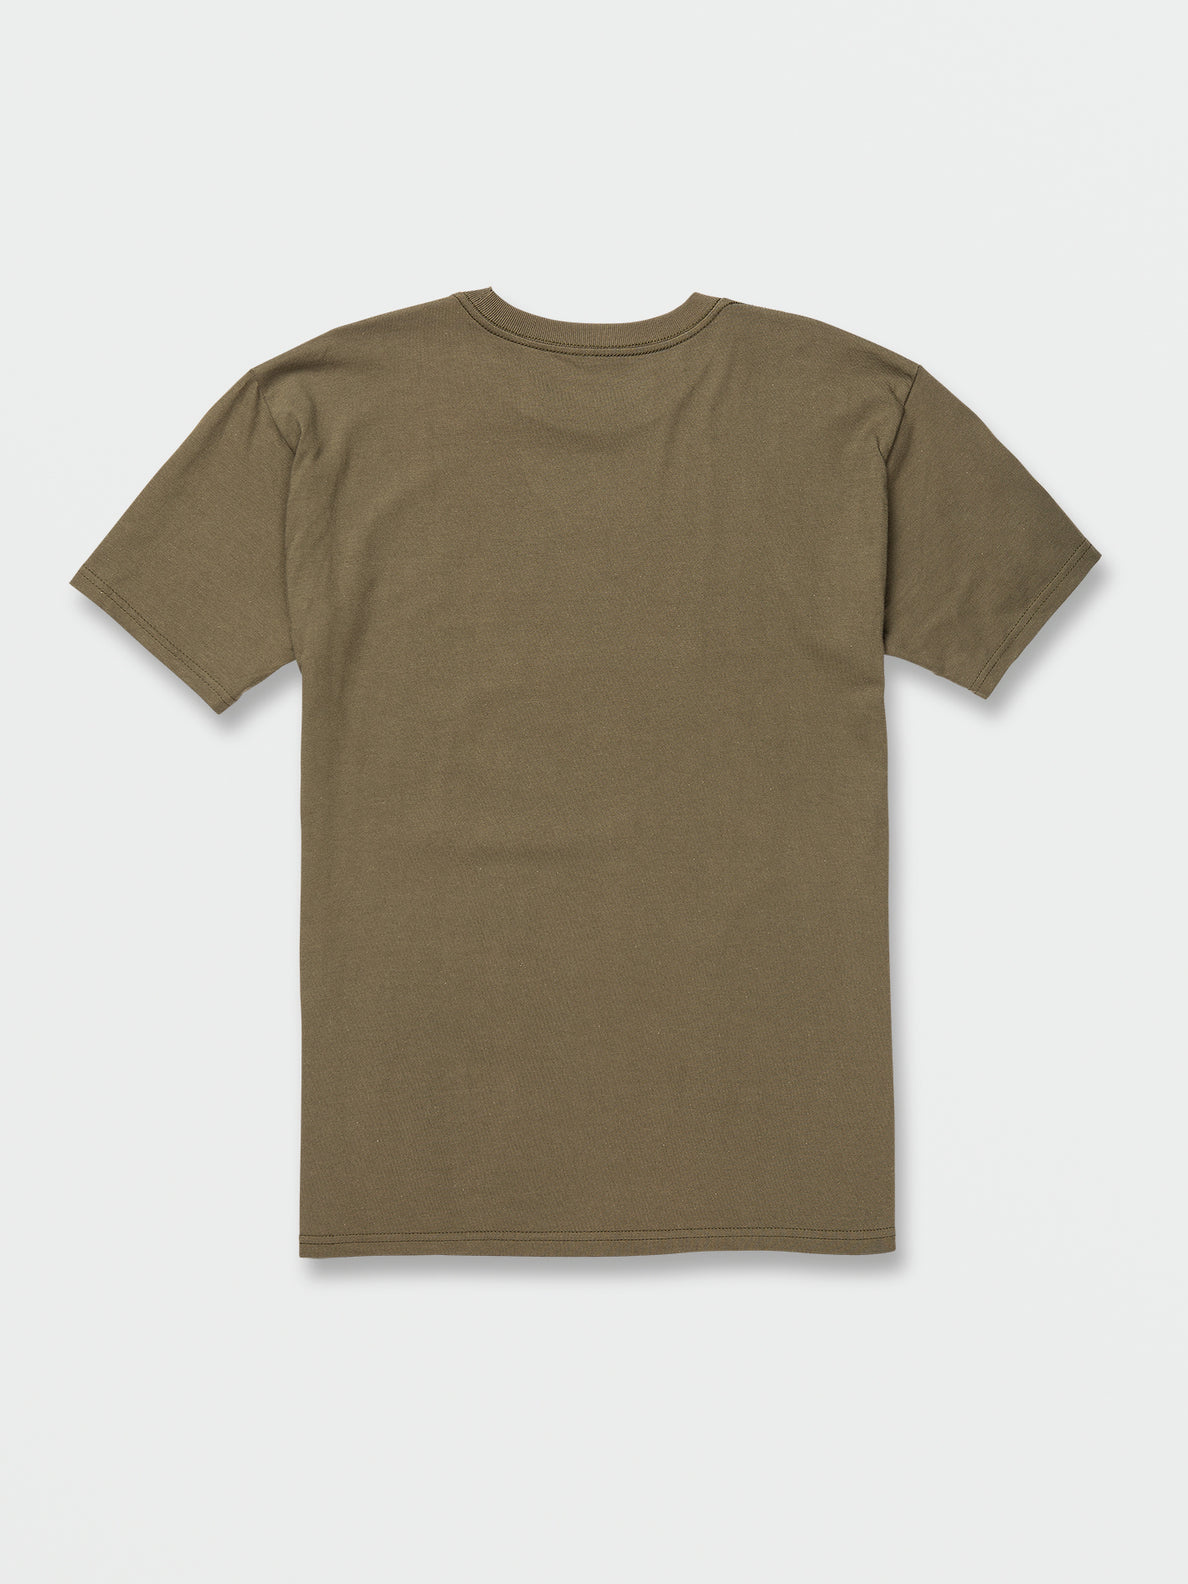 Double Take Short Sleeve Tee - Military (A3542202_MIL) [1]